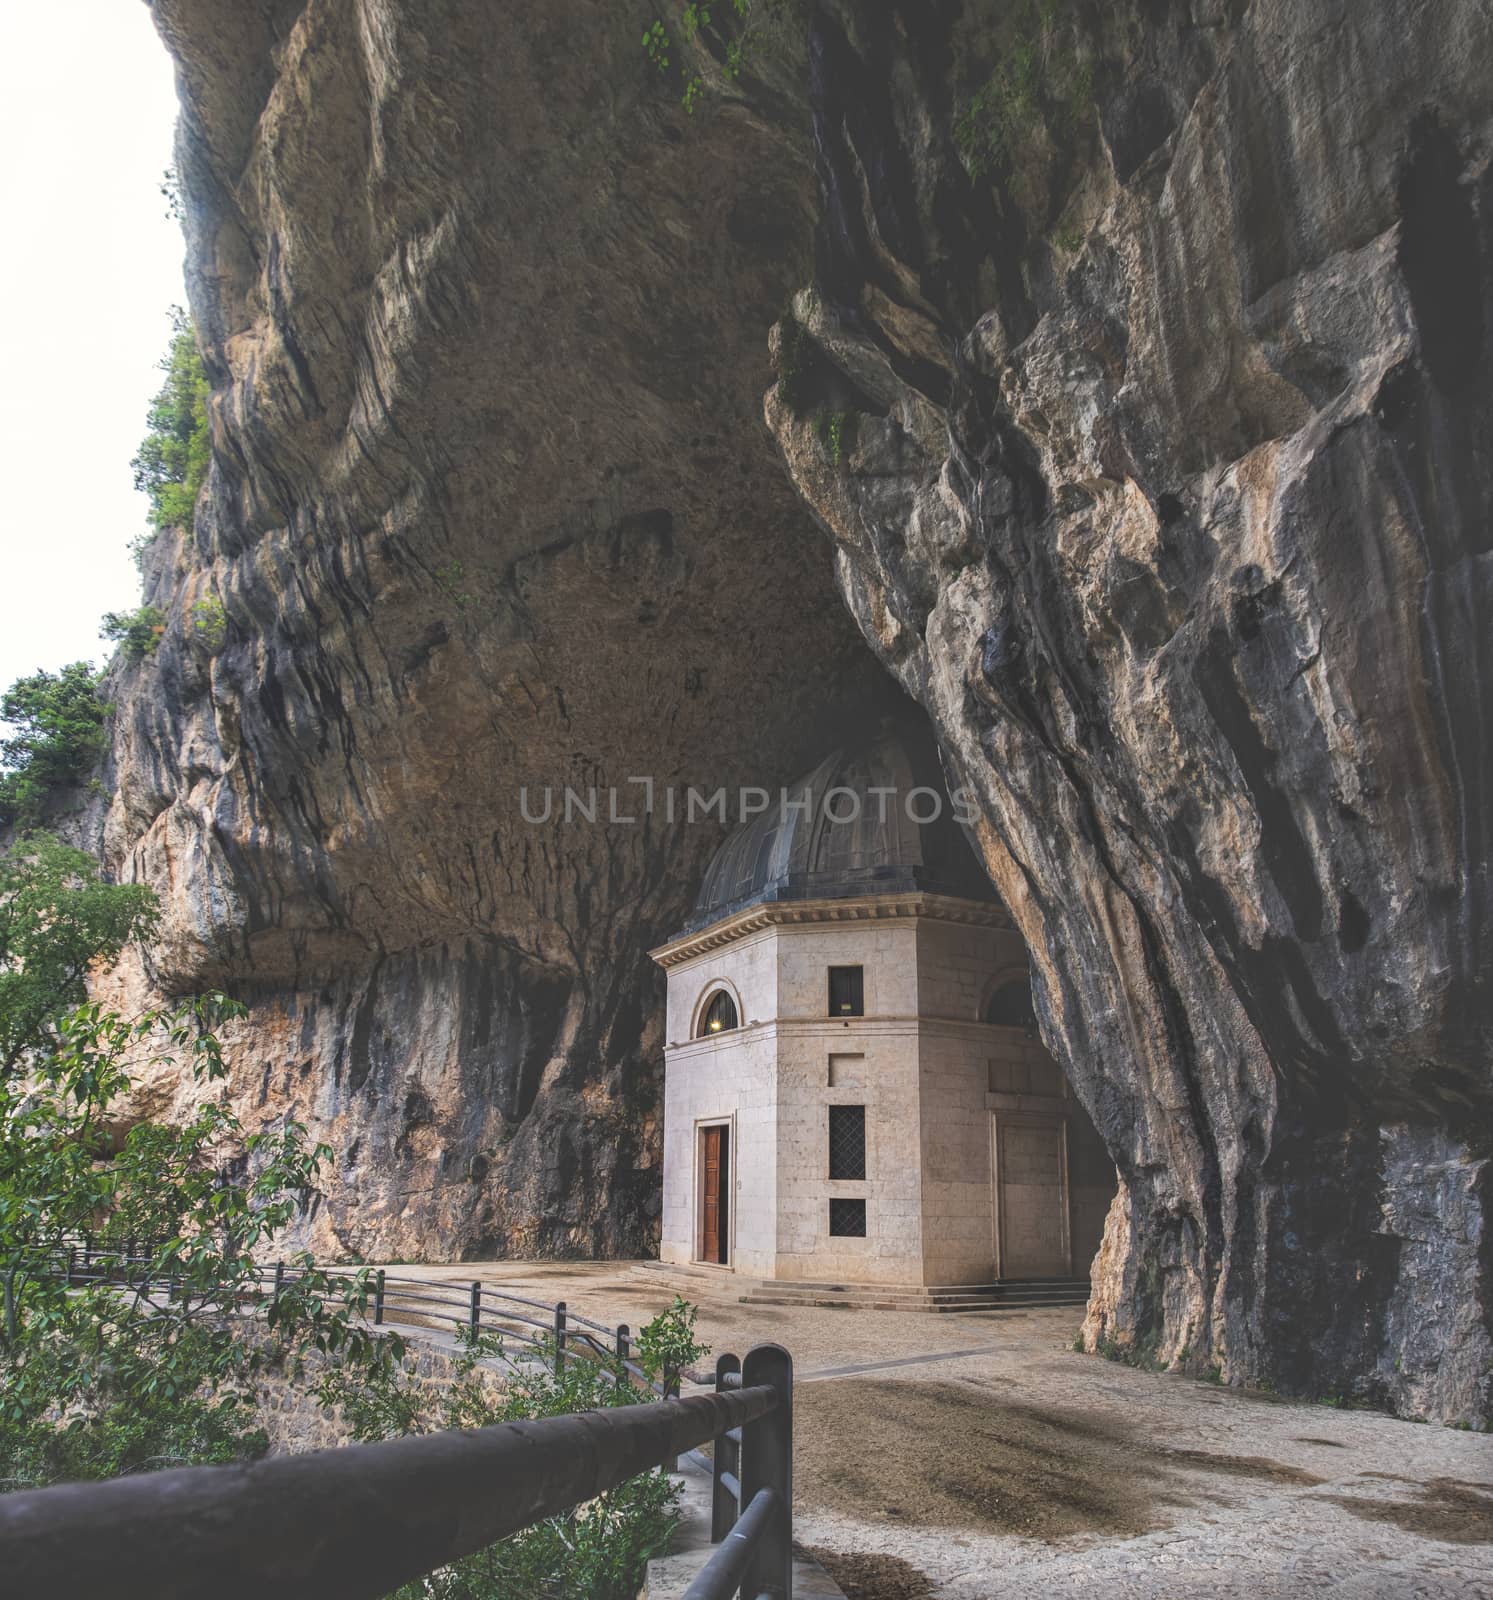 church inside cave - Italy - Marche - Valadier temple church near Frasassi caves in Genga Ancona by LucaLorenzelli